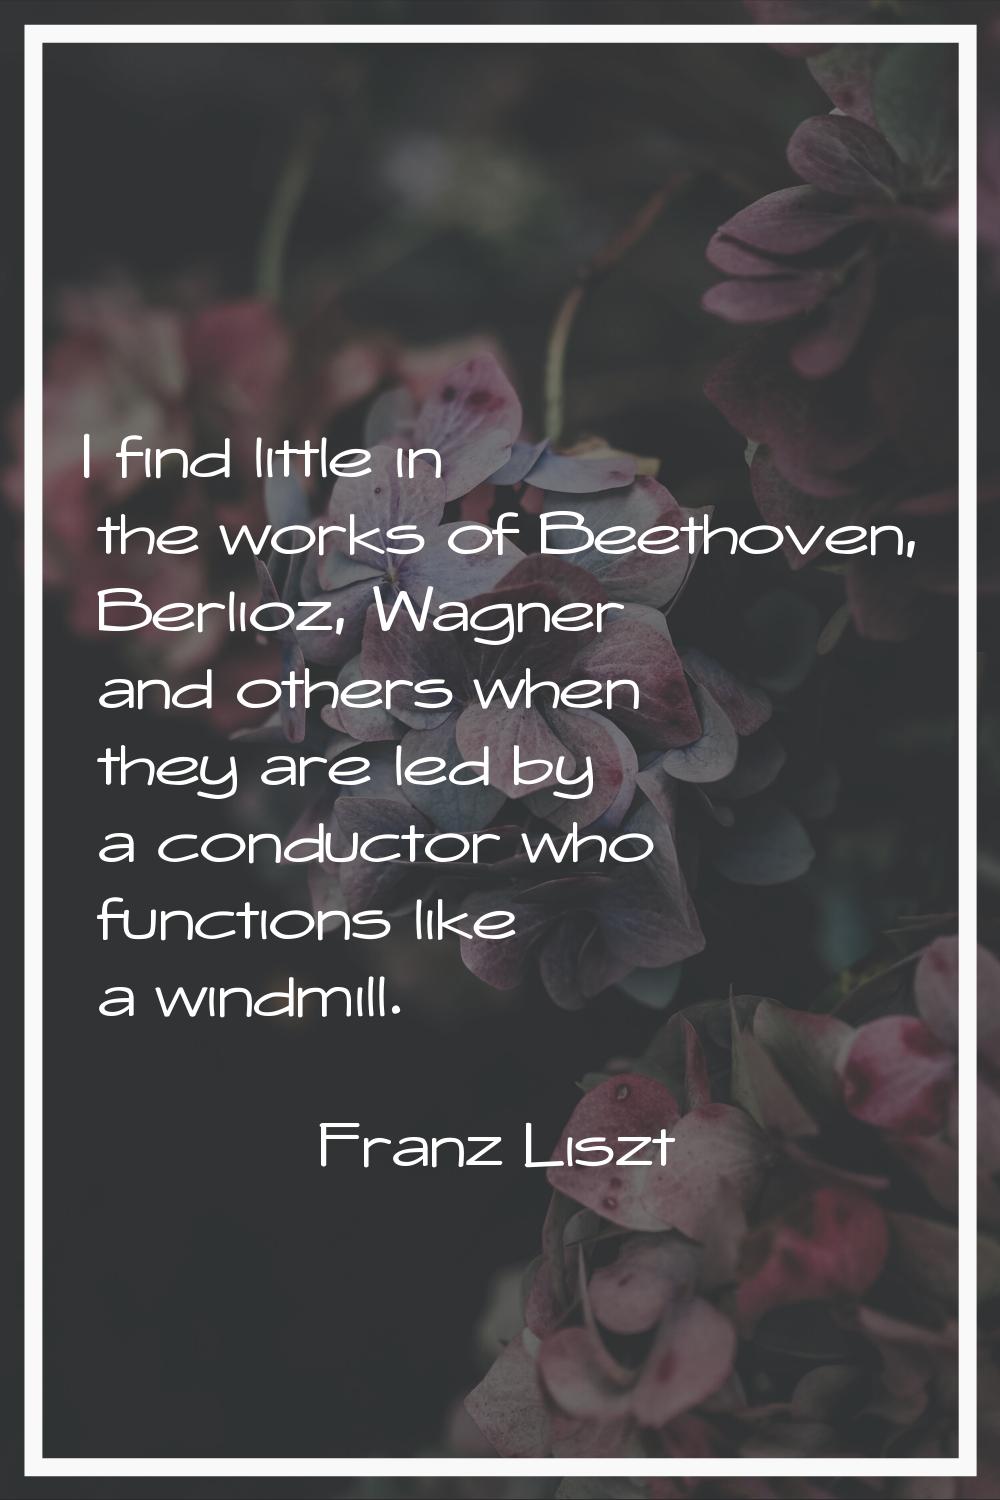 I find little in the works of Beethoven, Berlioz, Wagner and others when they are led by a conducto